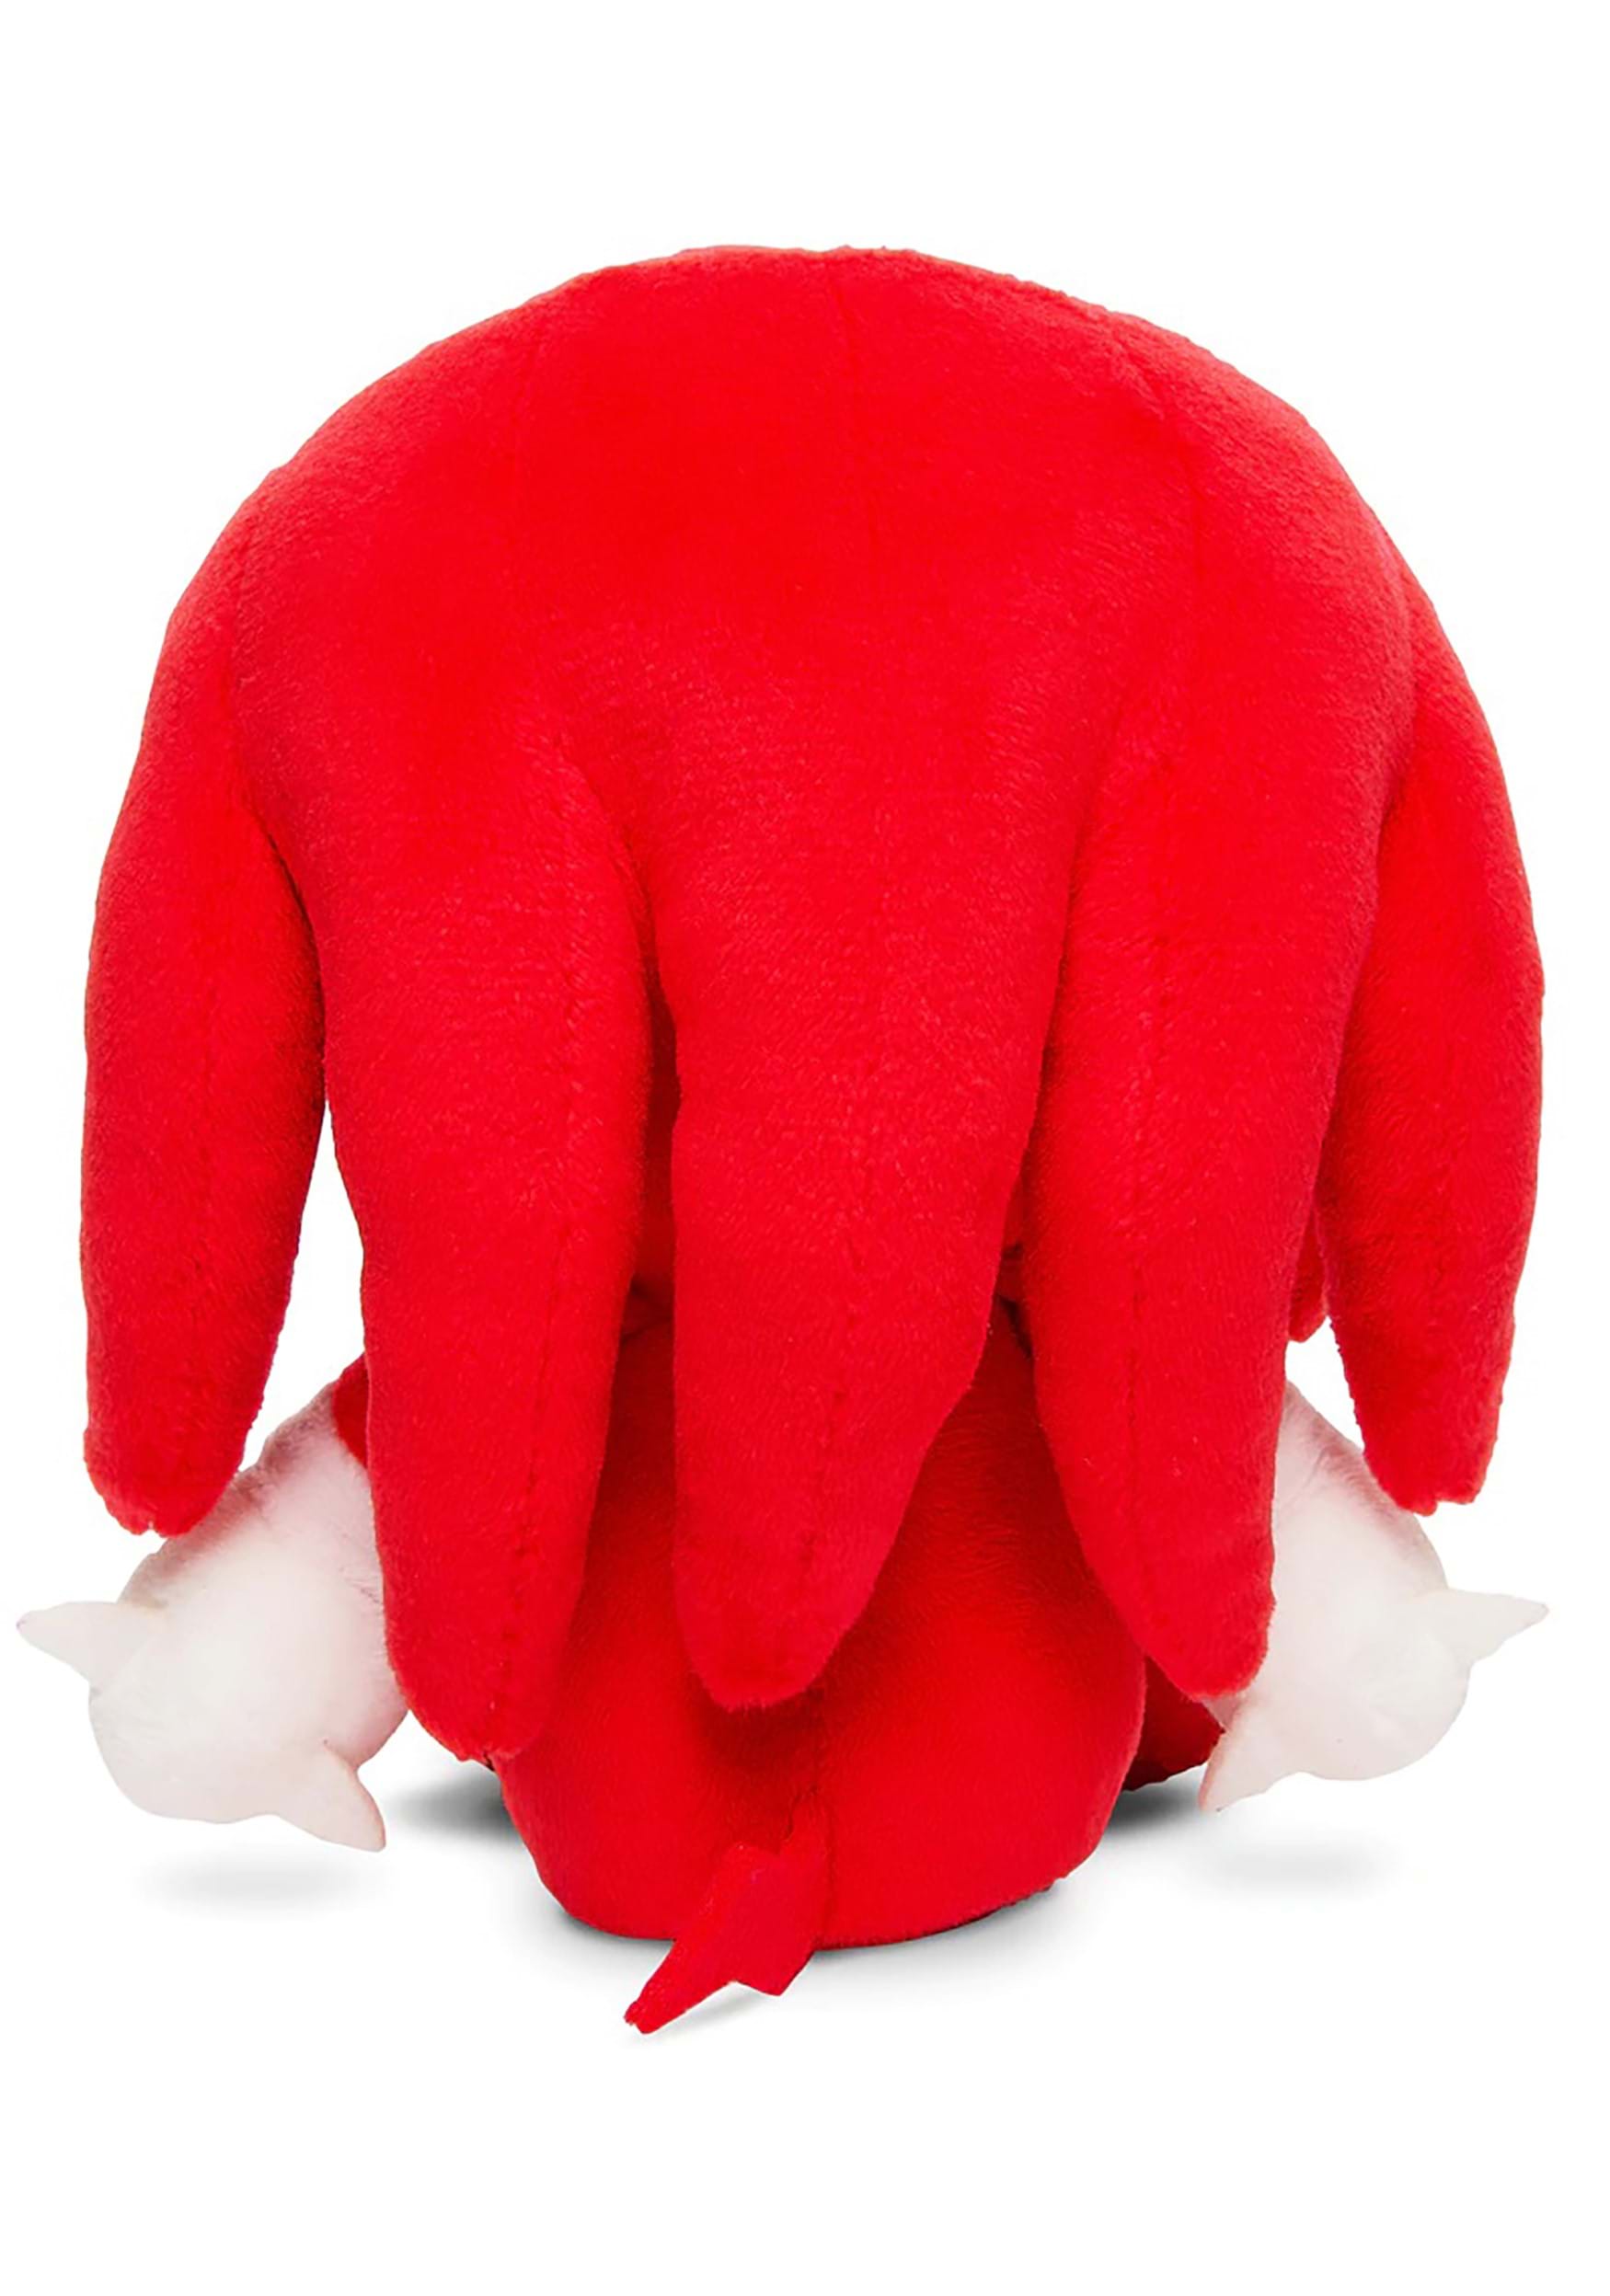 Sonic The Hedgehog 8 Inch Phunny Plush-Knuckles